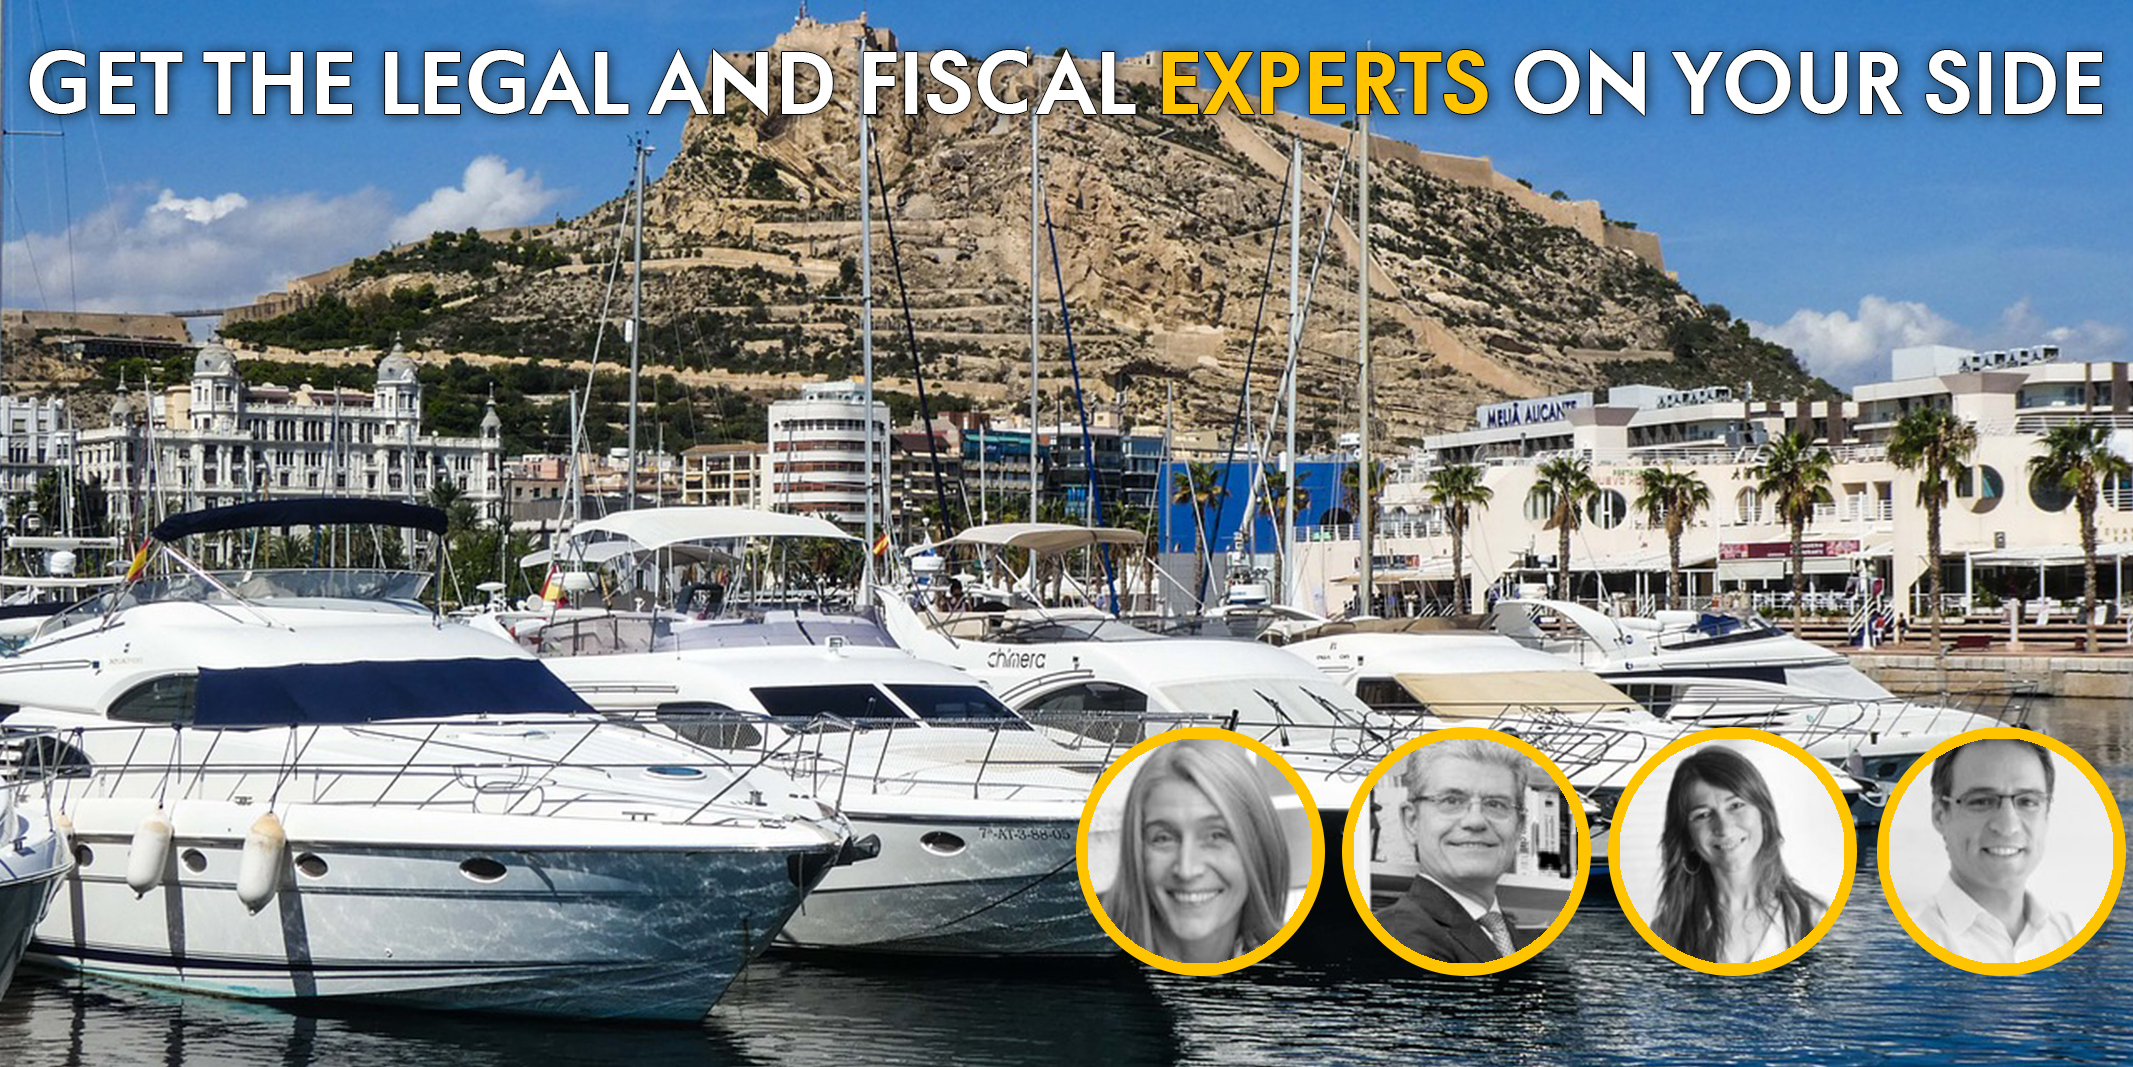 Get legal and financial experts to help you buy property in Spain.